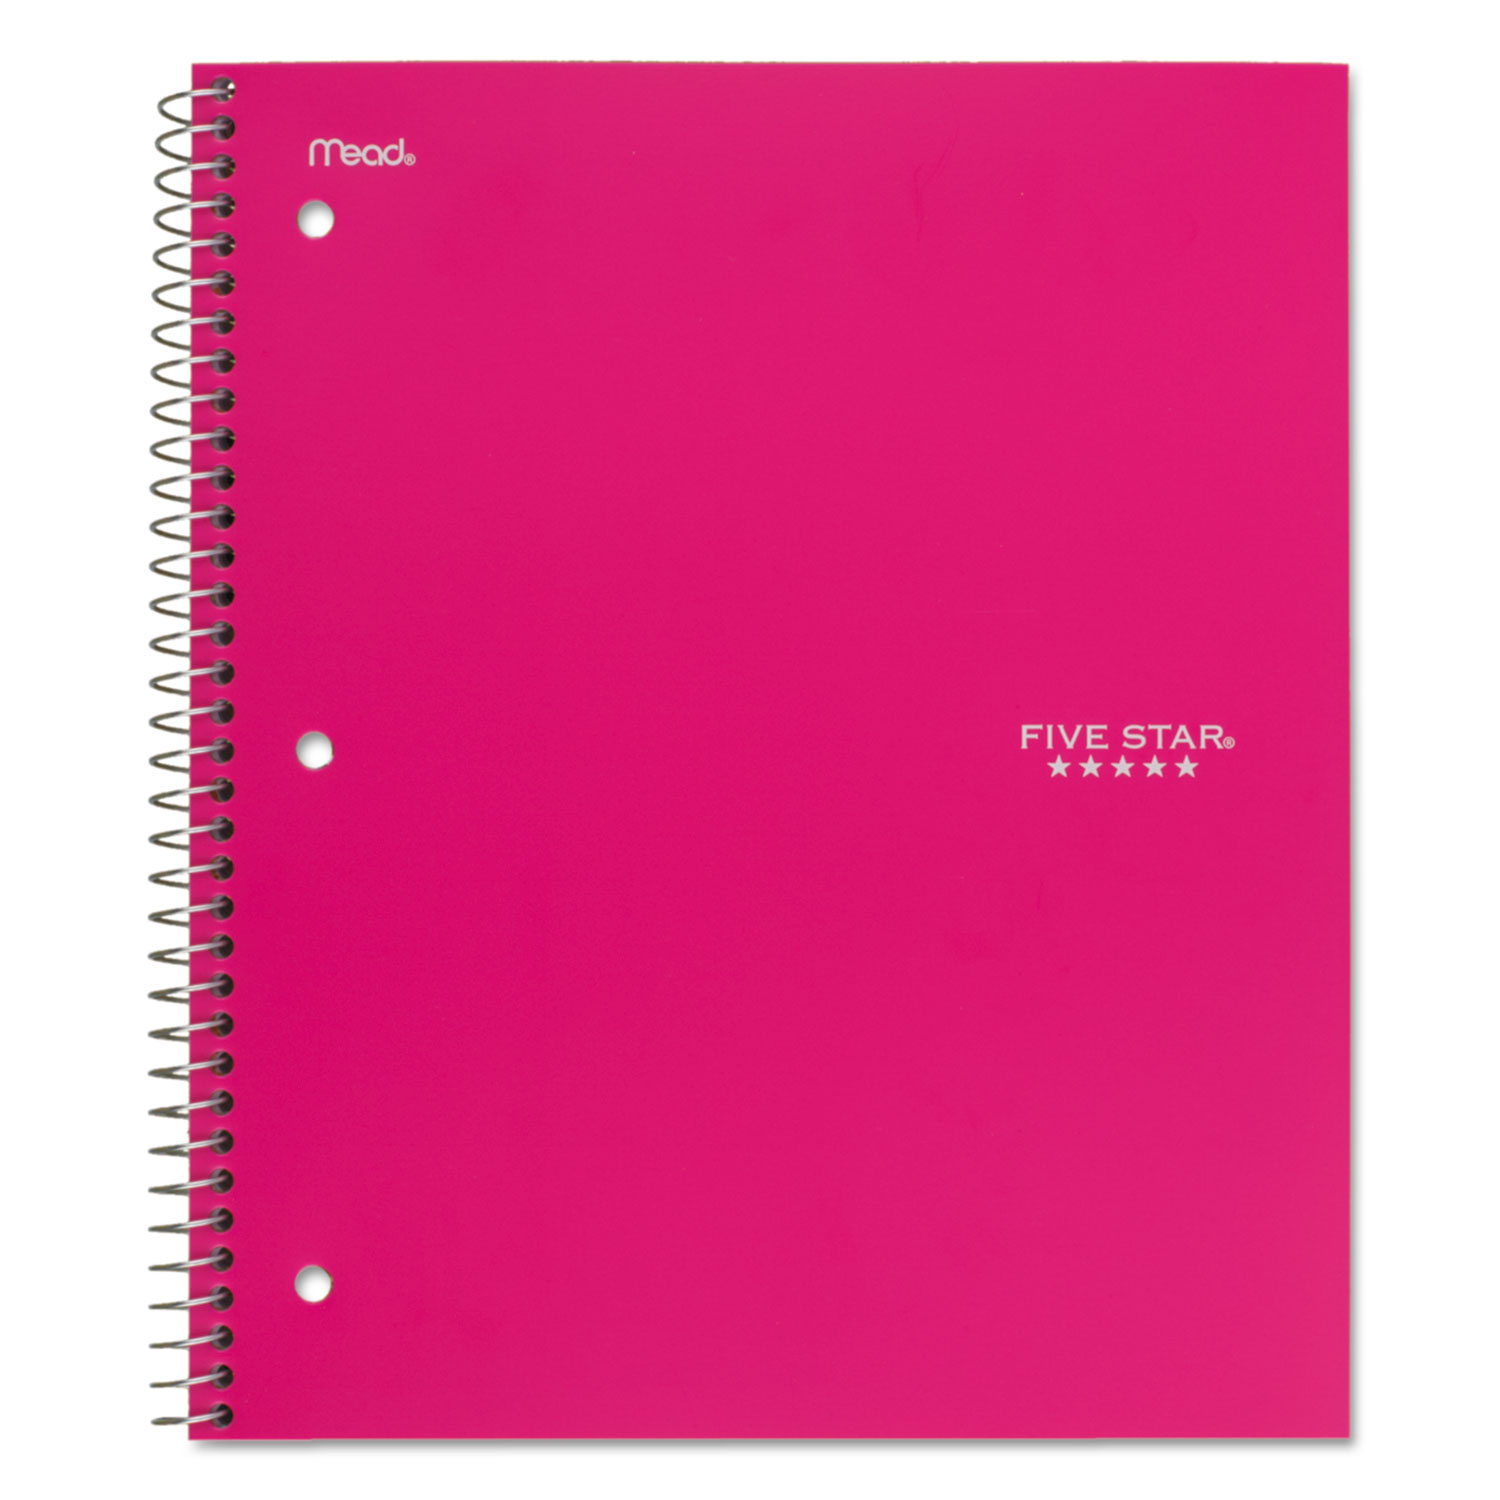  Five Star 06044 Trend Wirebound Notebook, 1 Subject, Medium/College Rule, Assorted Color Covers, 11 x 8.5, 100 Sheets (MEA06044) 